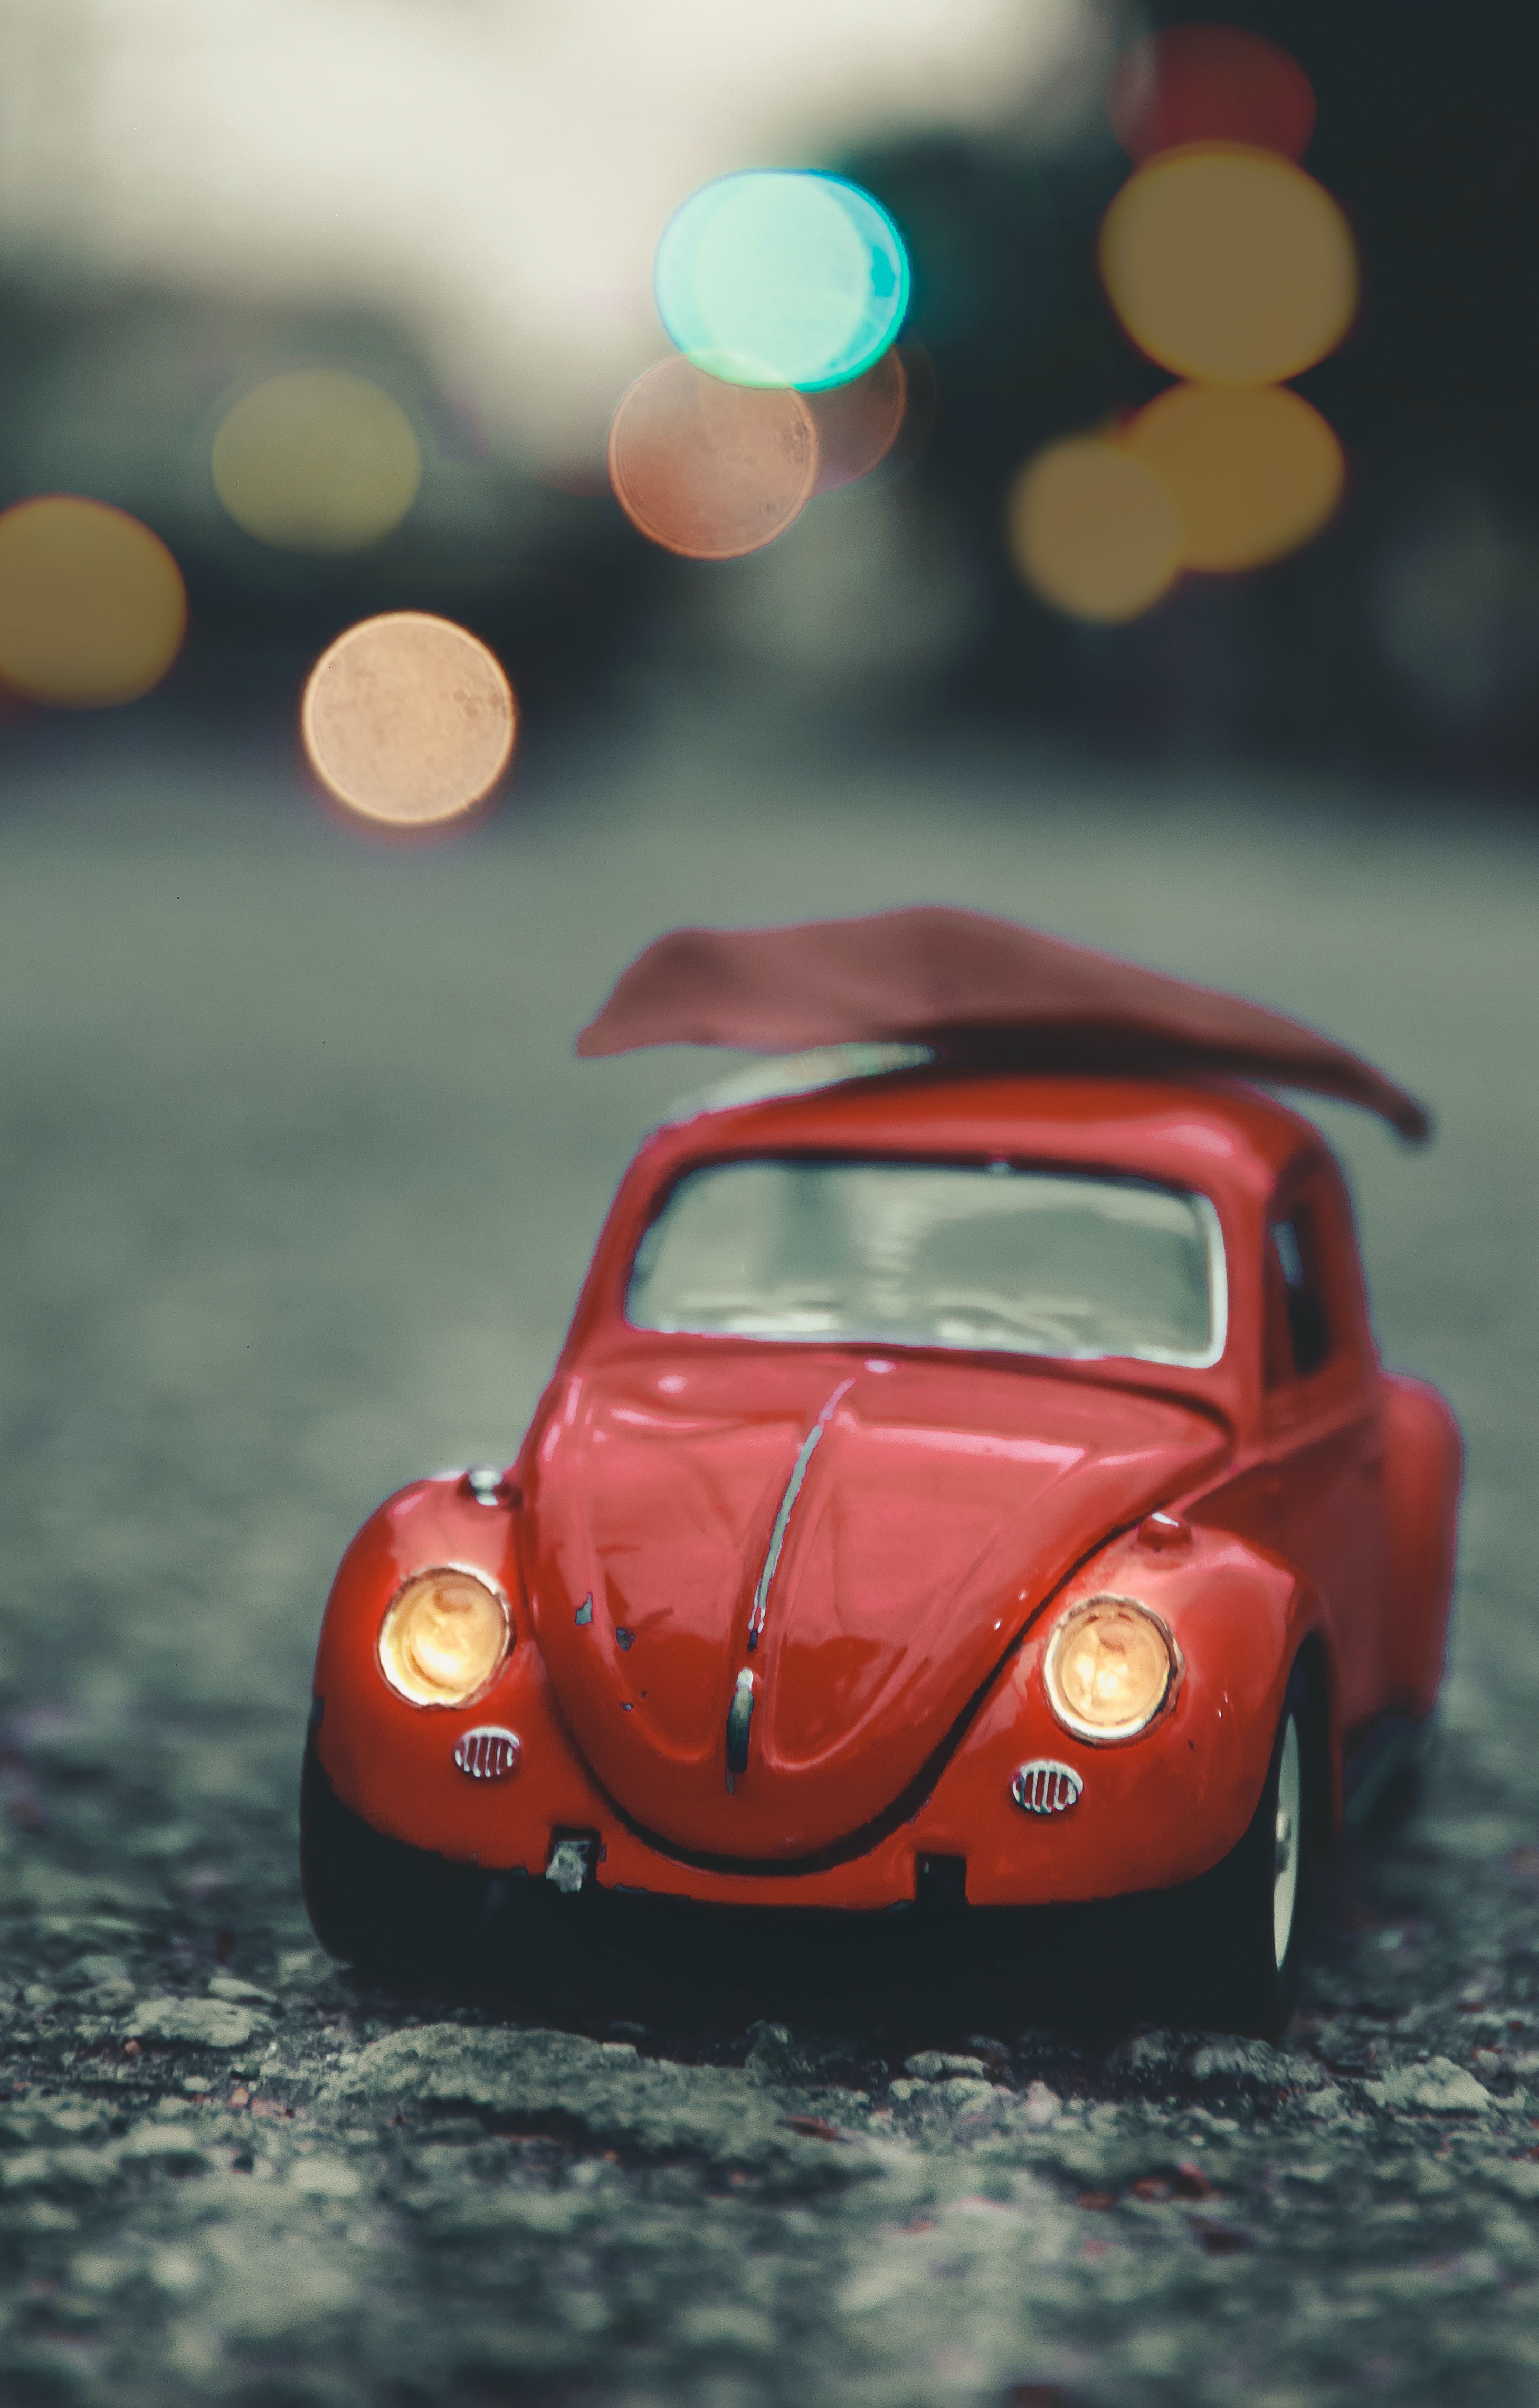 Wallpaper Red Volkswagen Beetle on Road During Daytime, Background -  Download Free Image